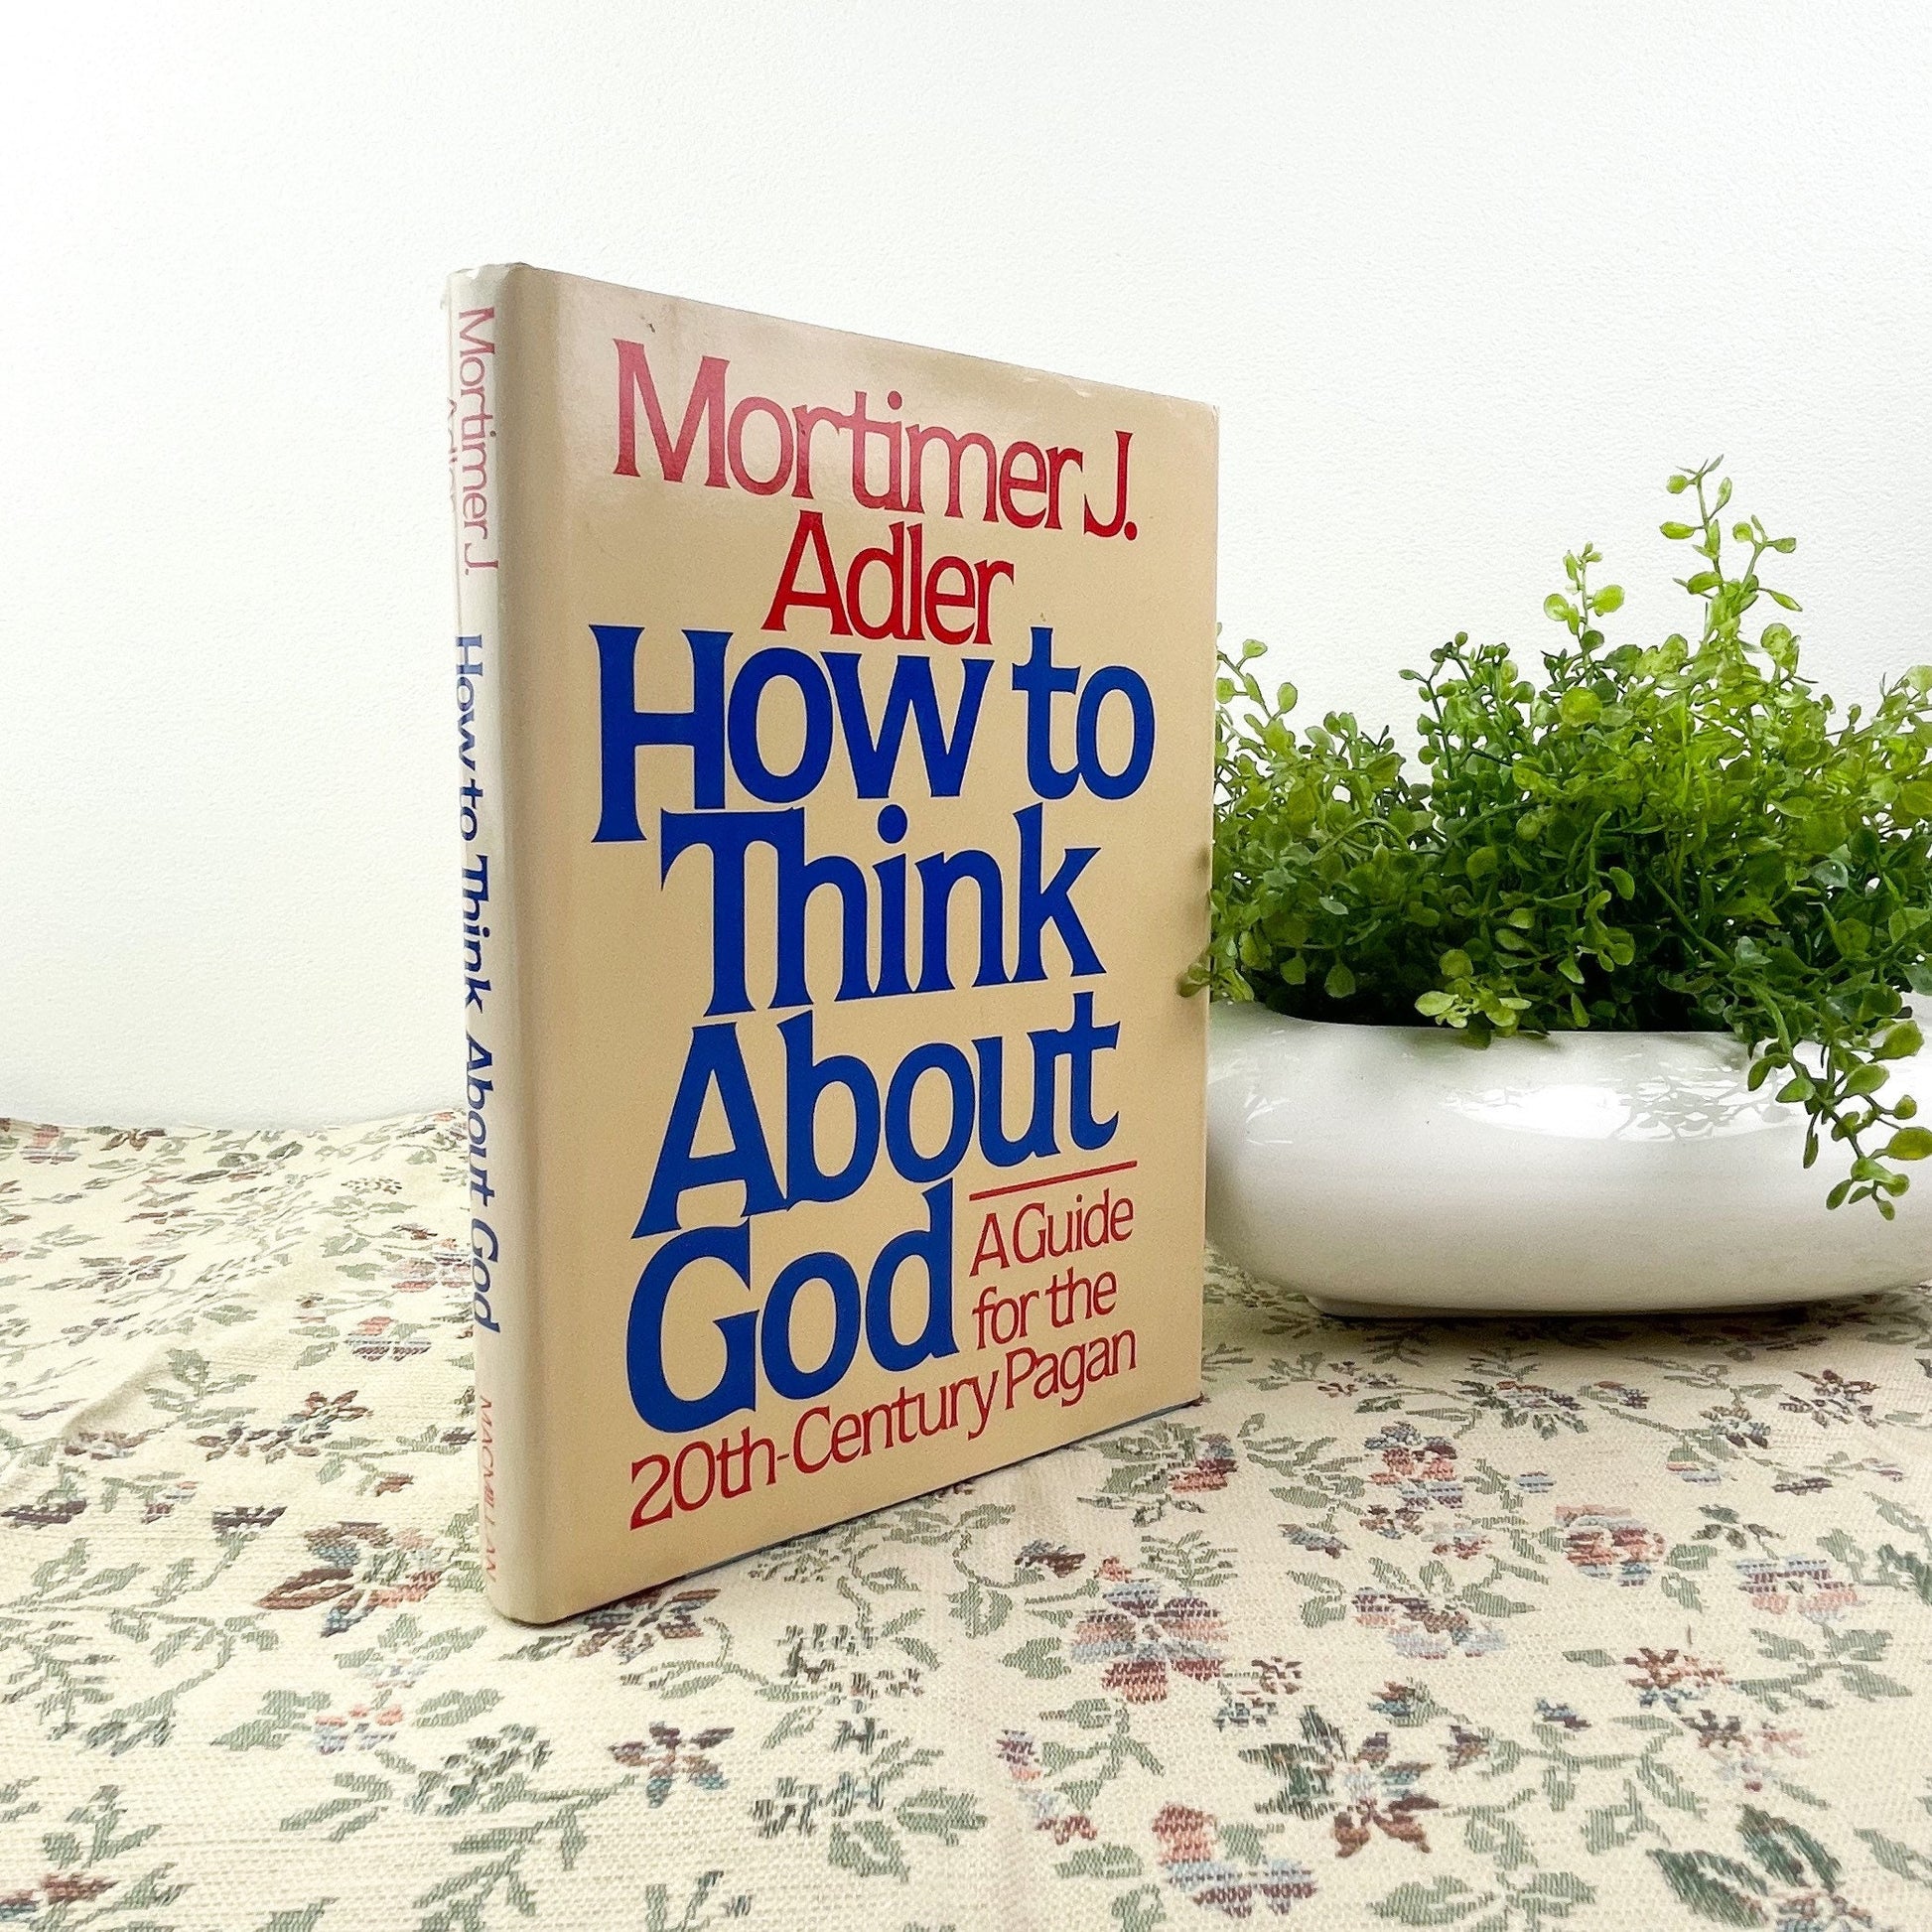 How To Think About God by Mortimer J. Adler